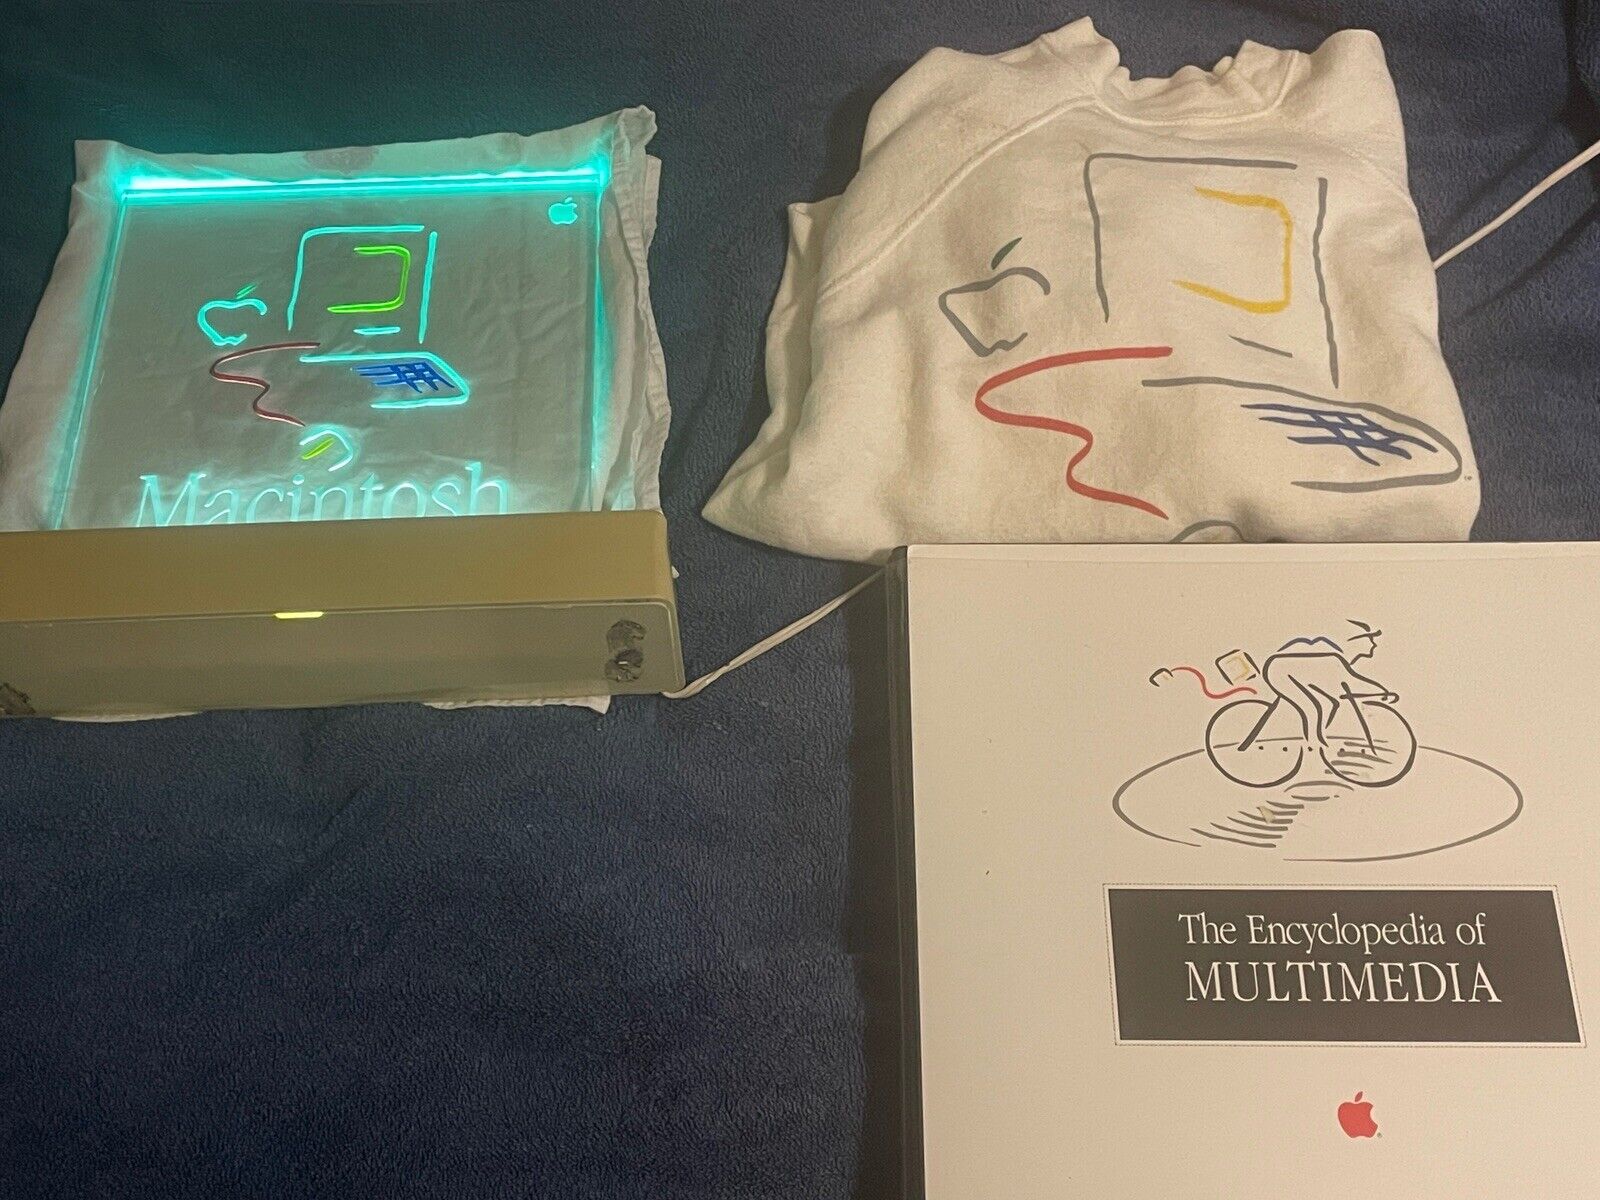 Apple Macintosh Matisse / Picasso Sign And Sweater, Ultra Rare Laser Disk.